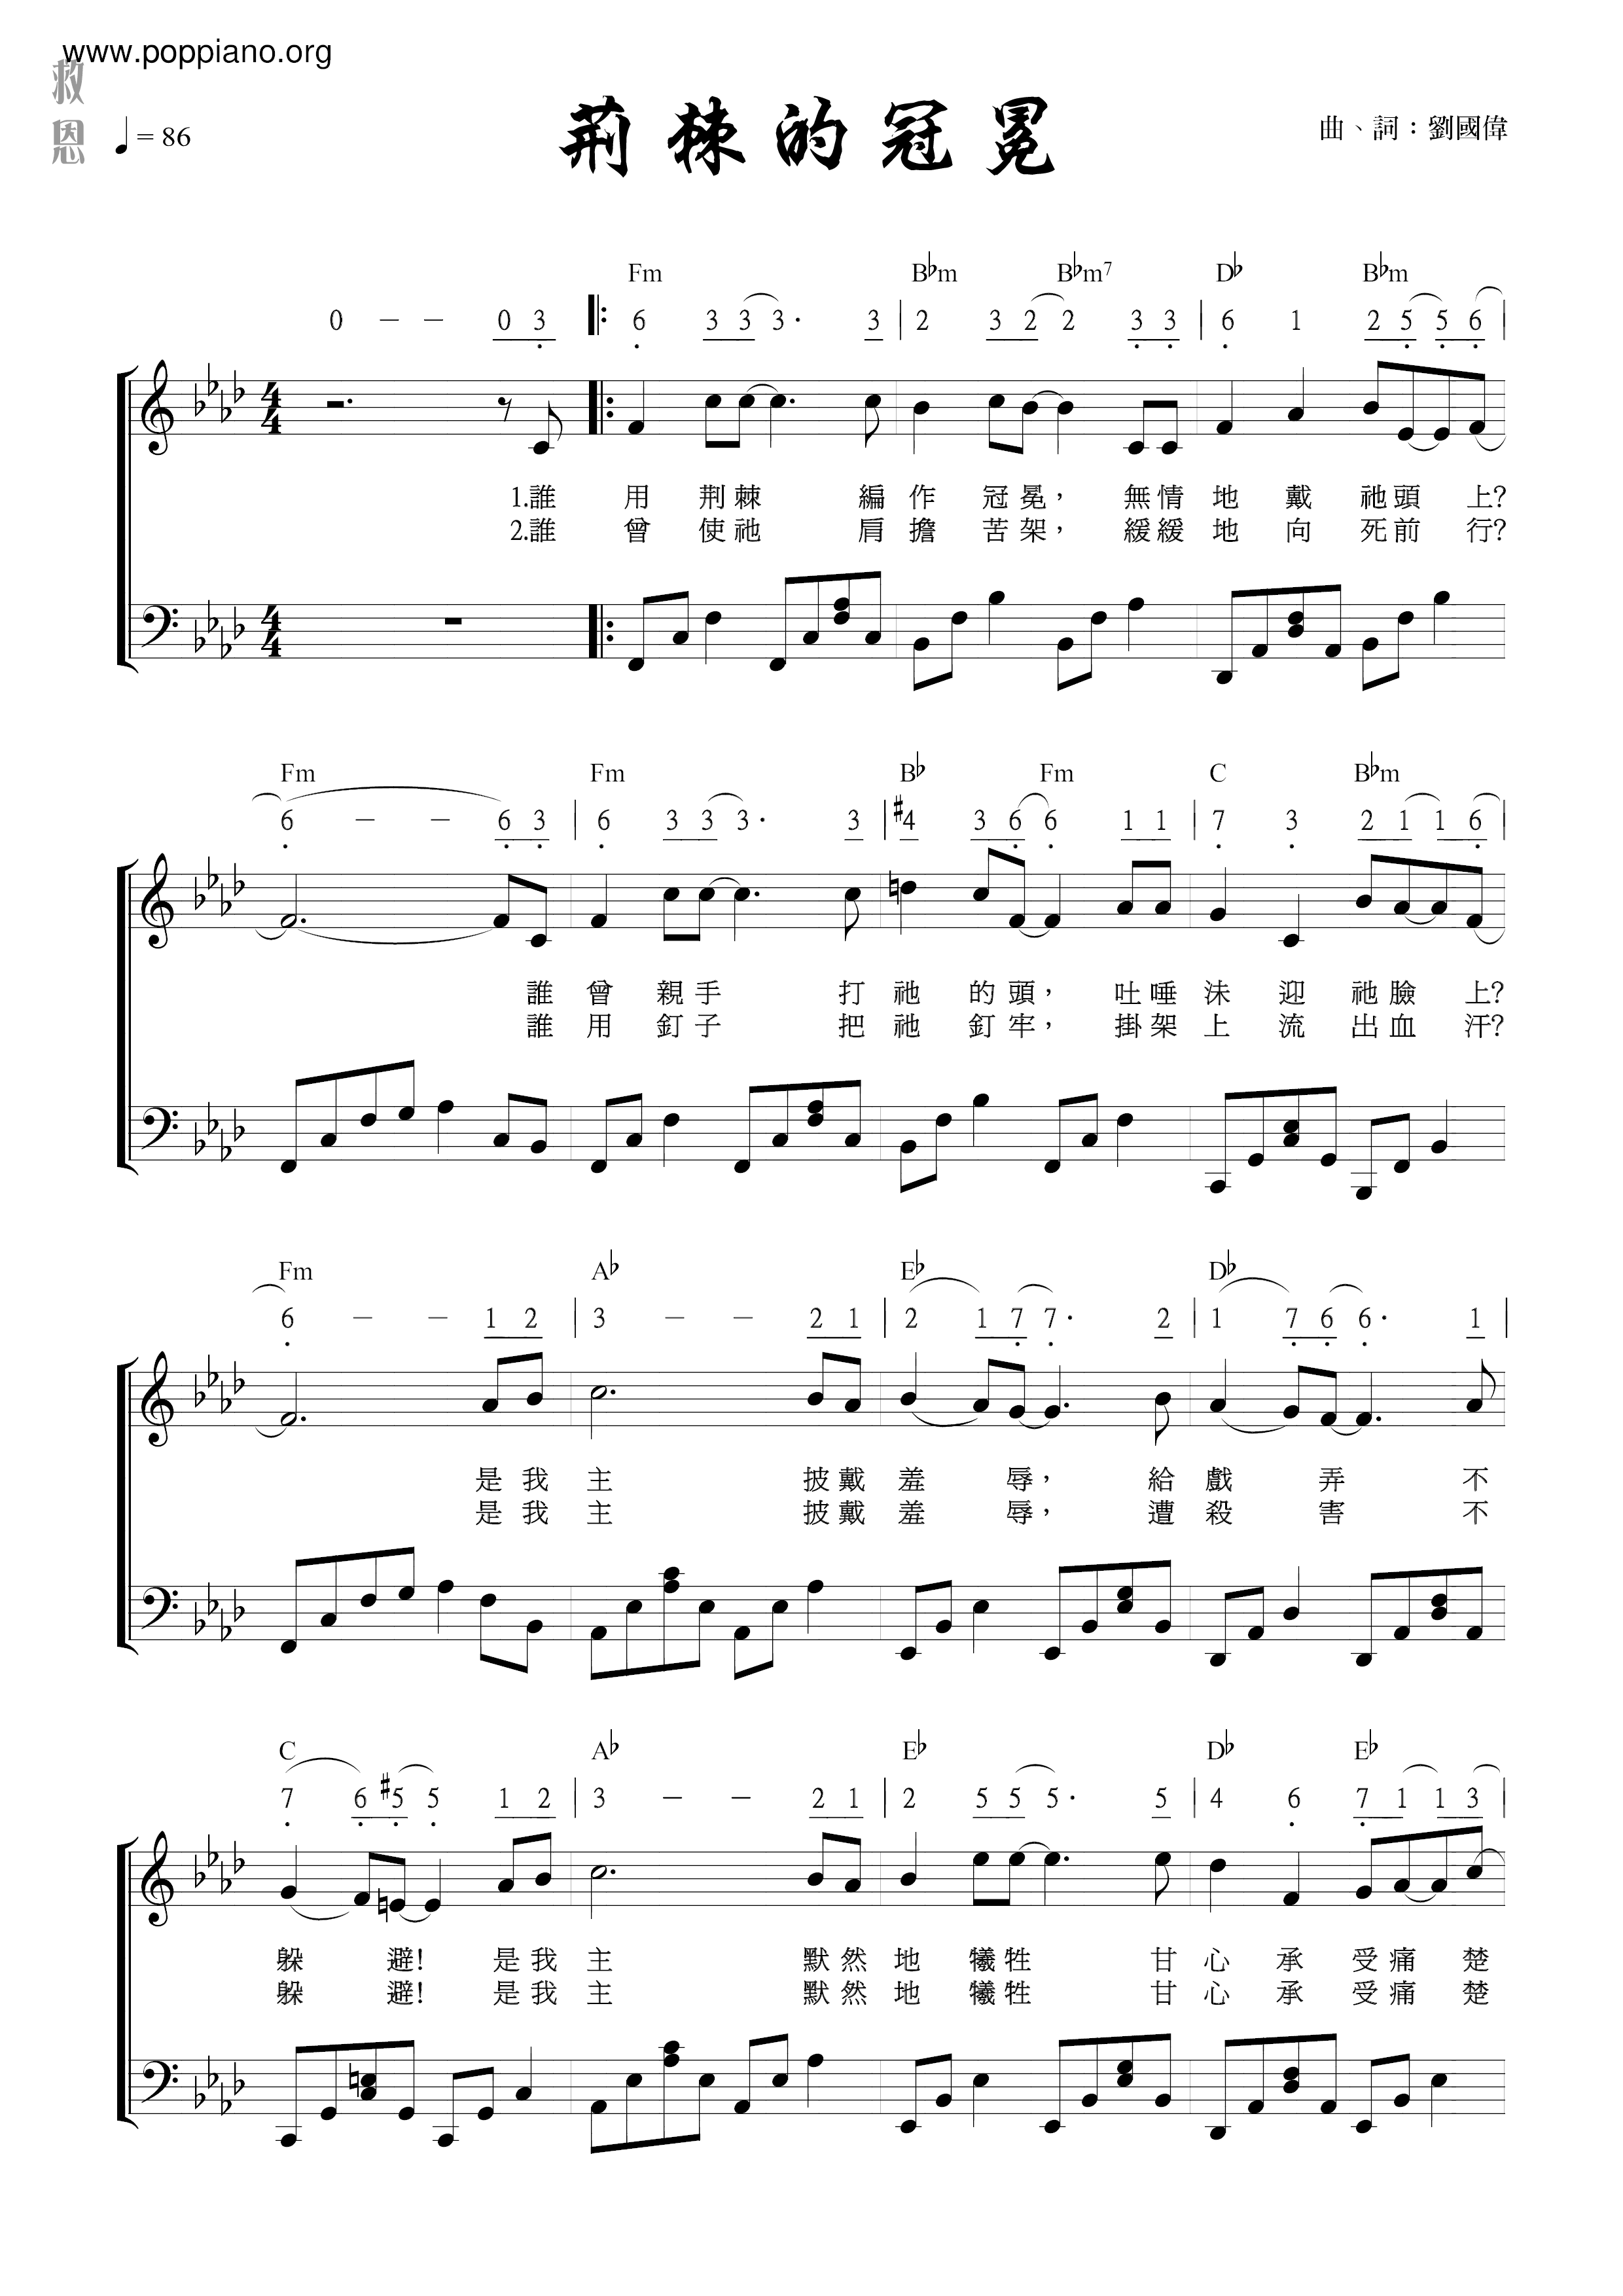 Crown Of Thorns Score